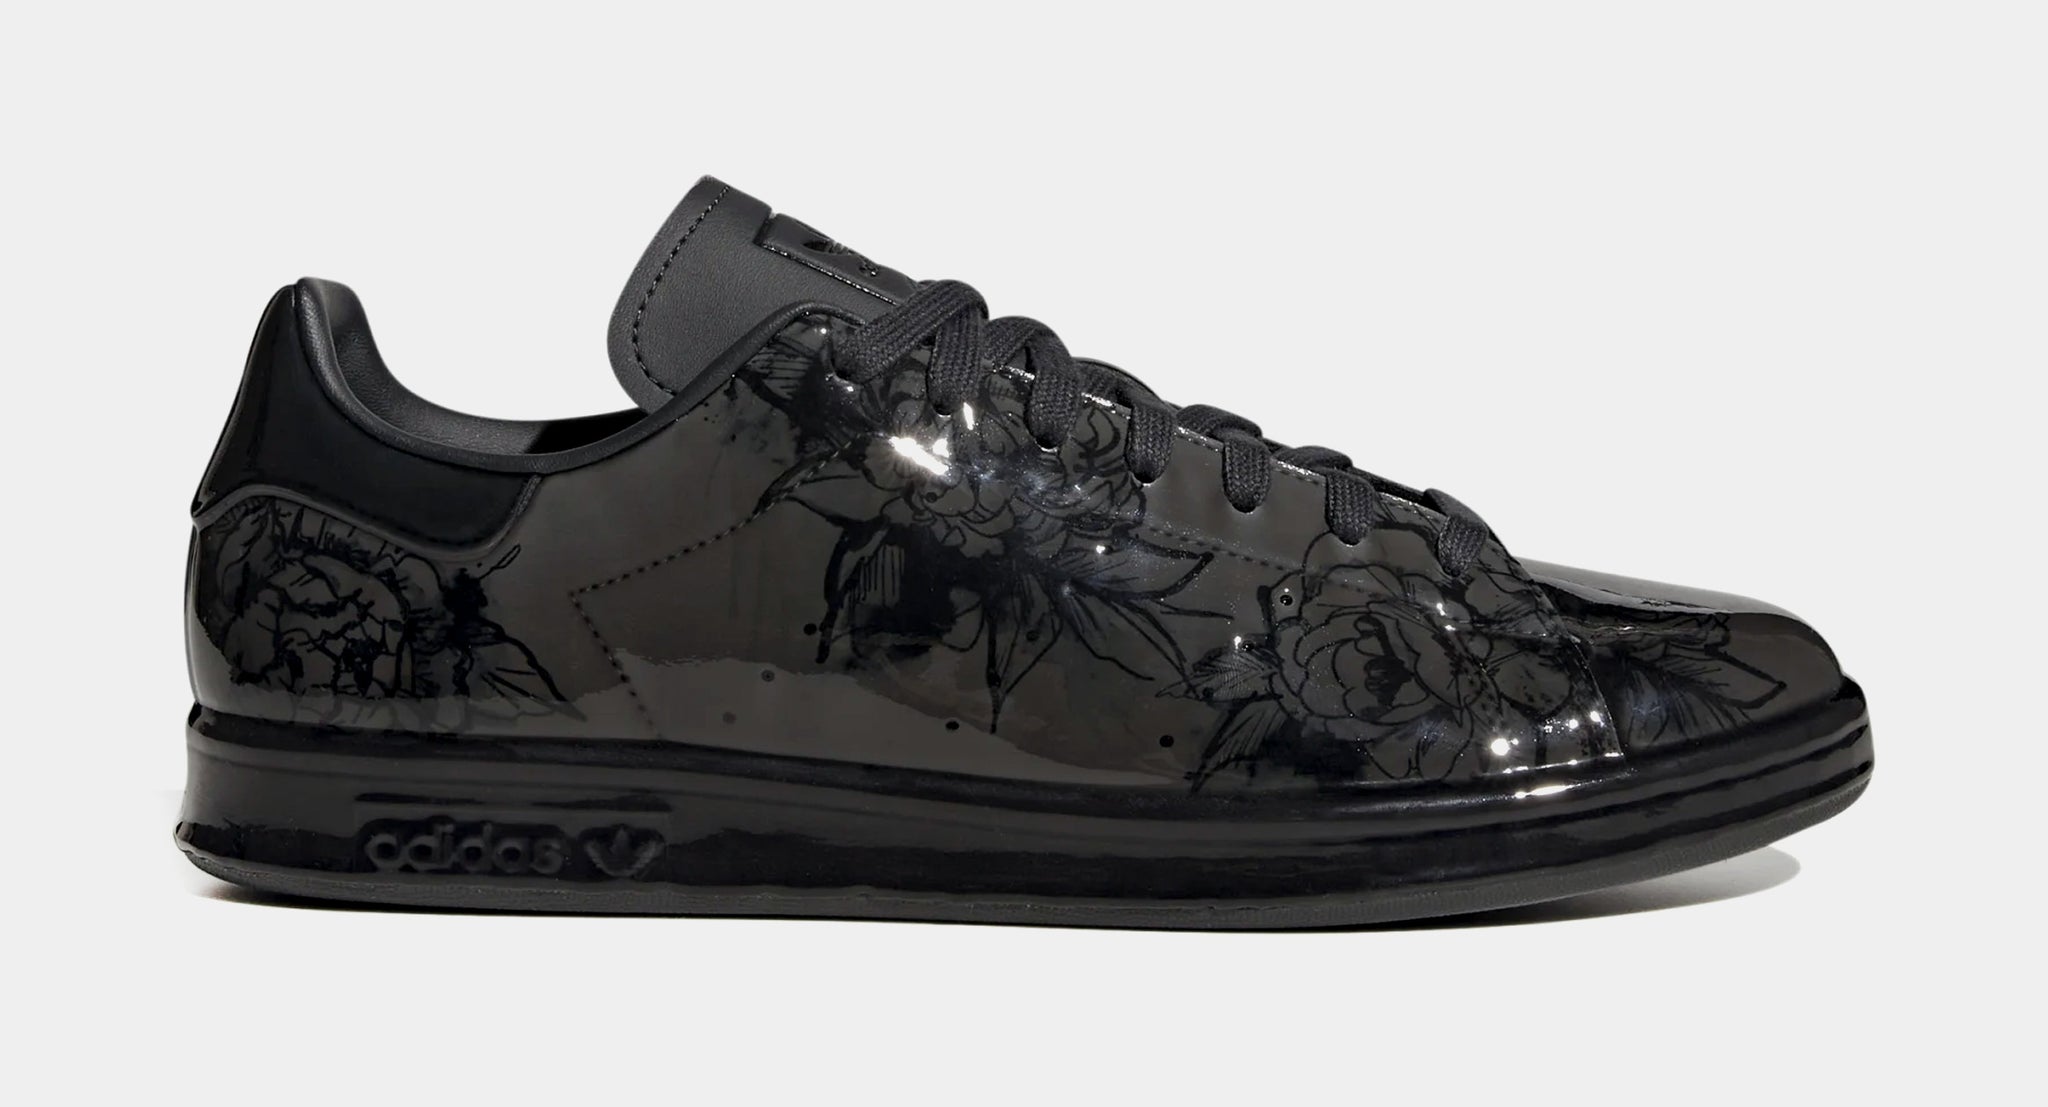 Shoes - Stan Smith Shoes - Black